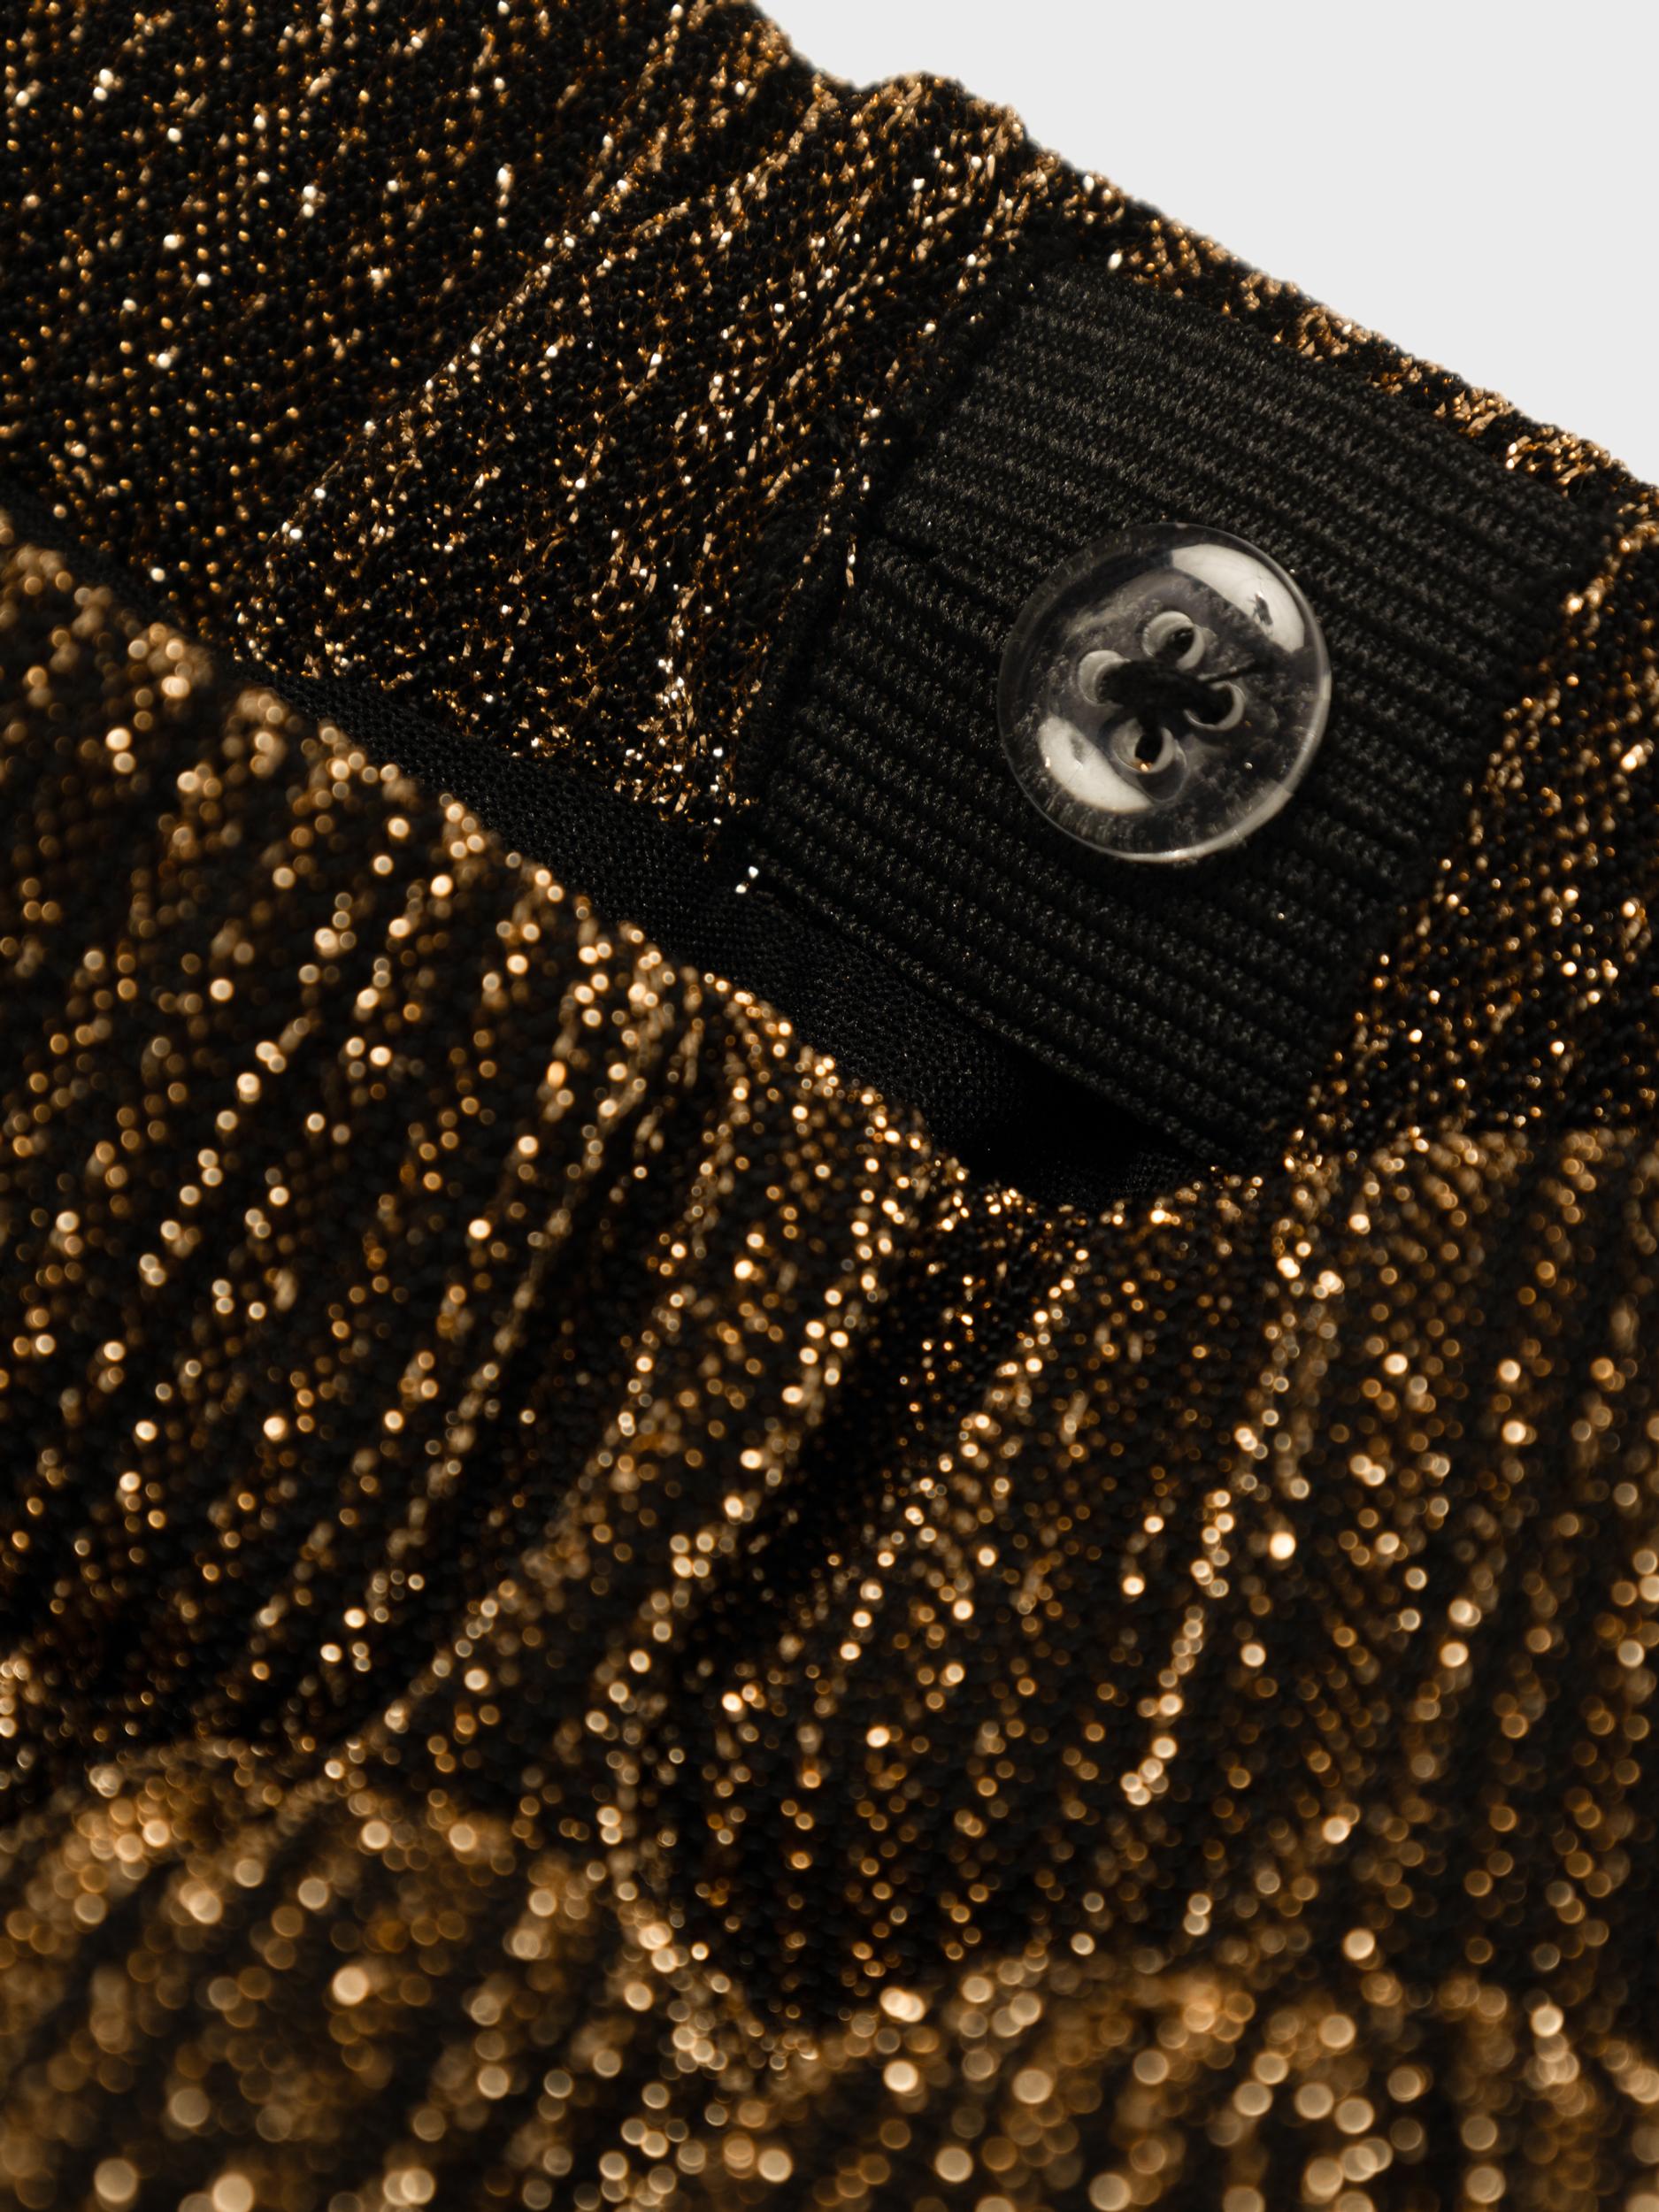 Girl's Risilk Skirt-Gold Colour-Close Up View